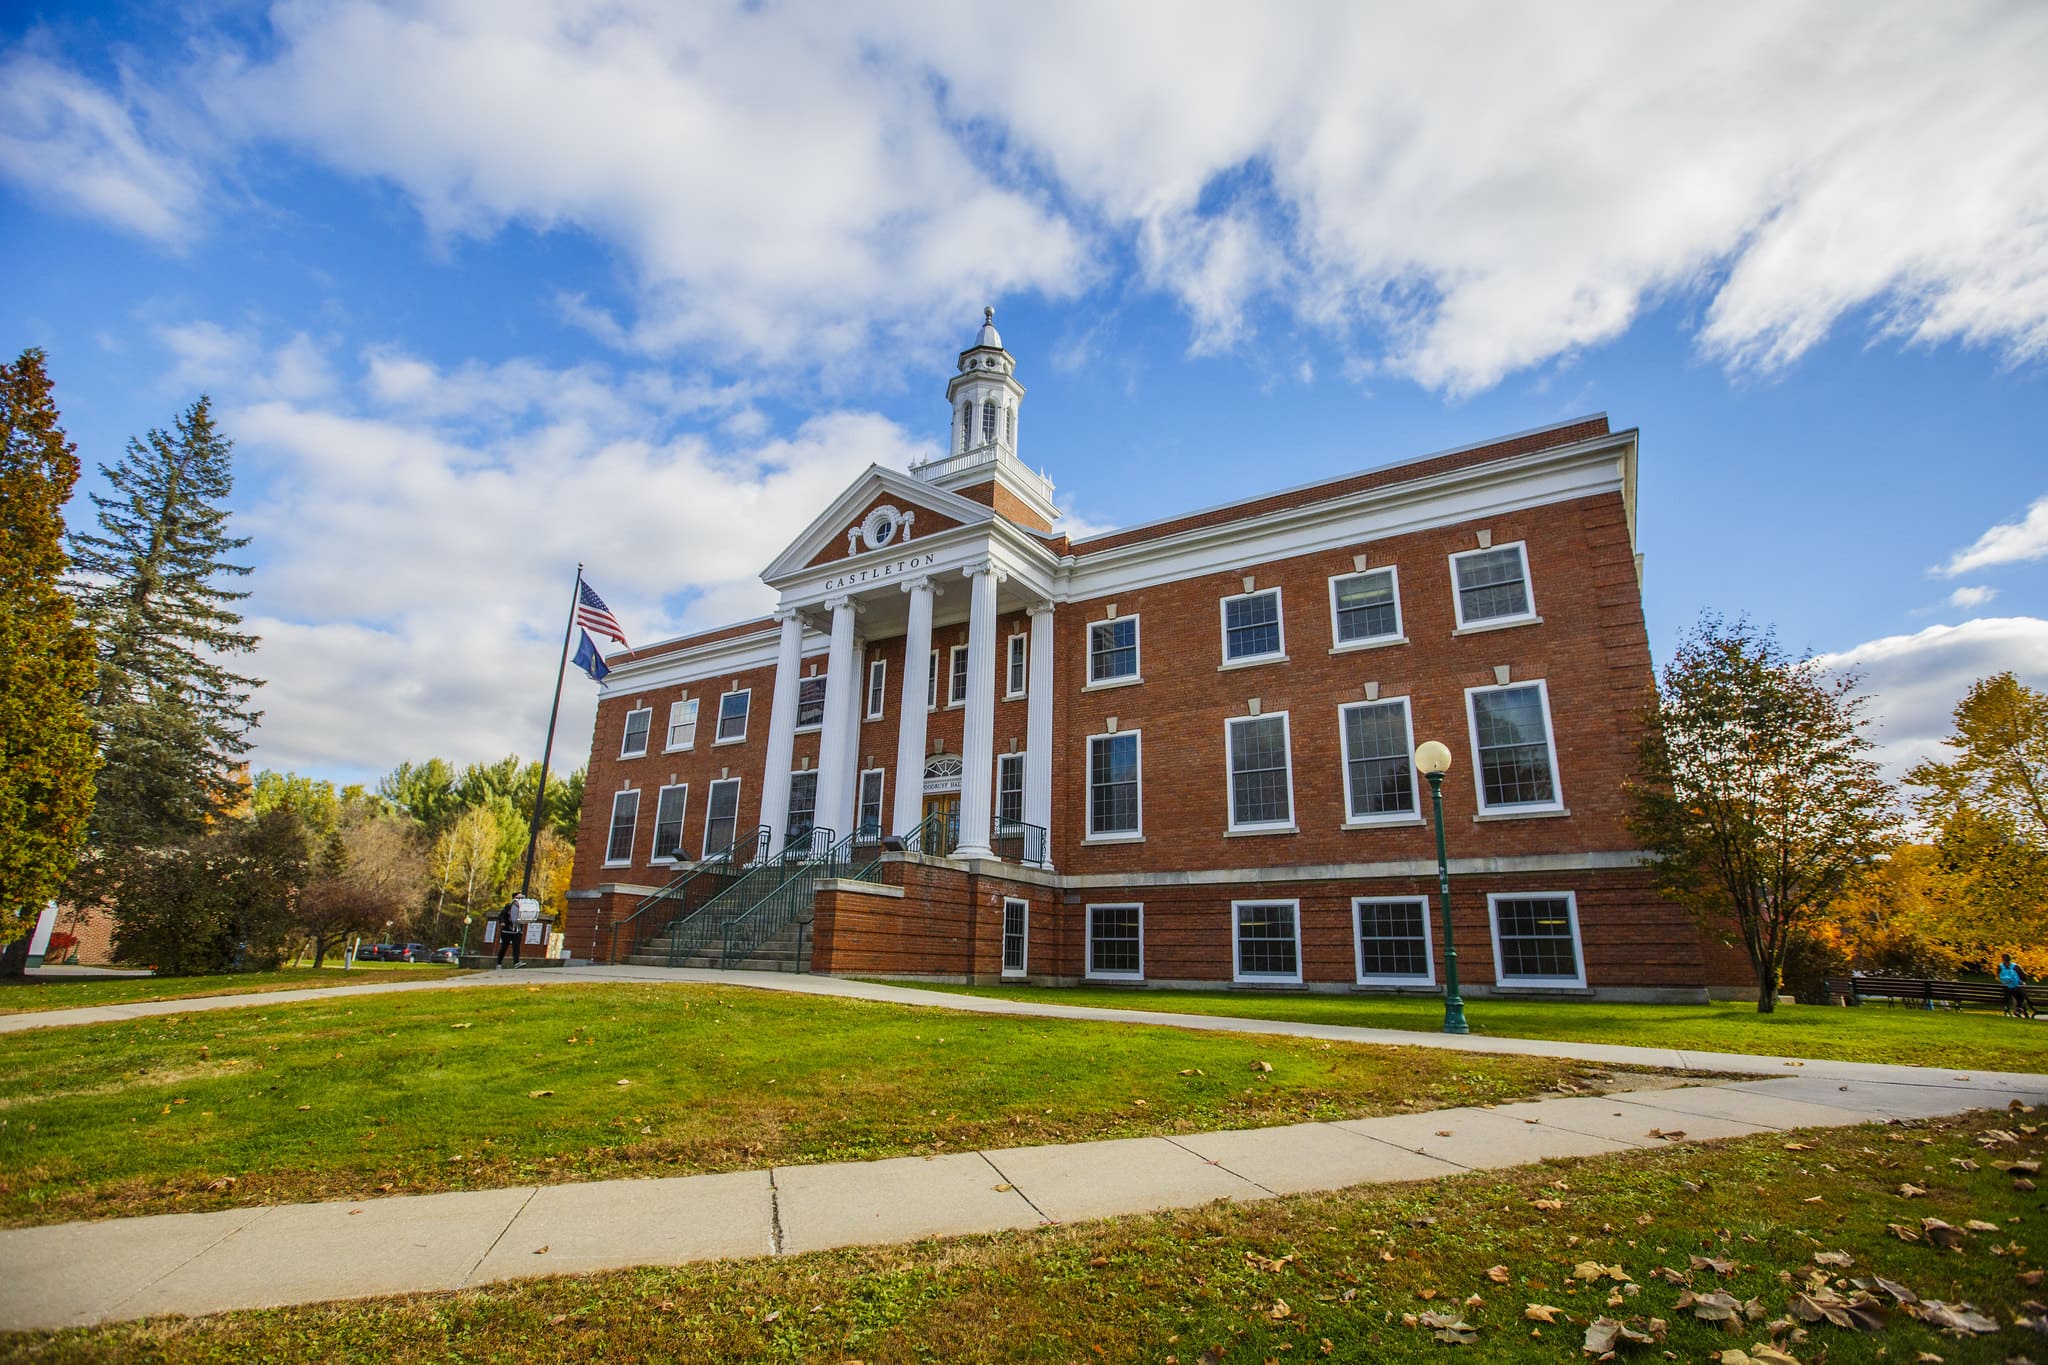 A brick building with a clock tower on the Castleton Campus.